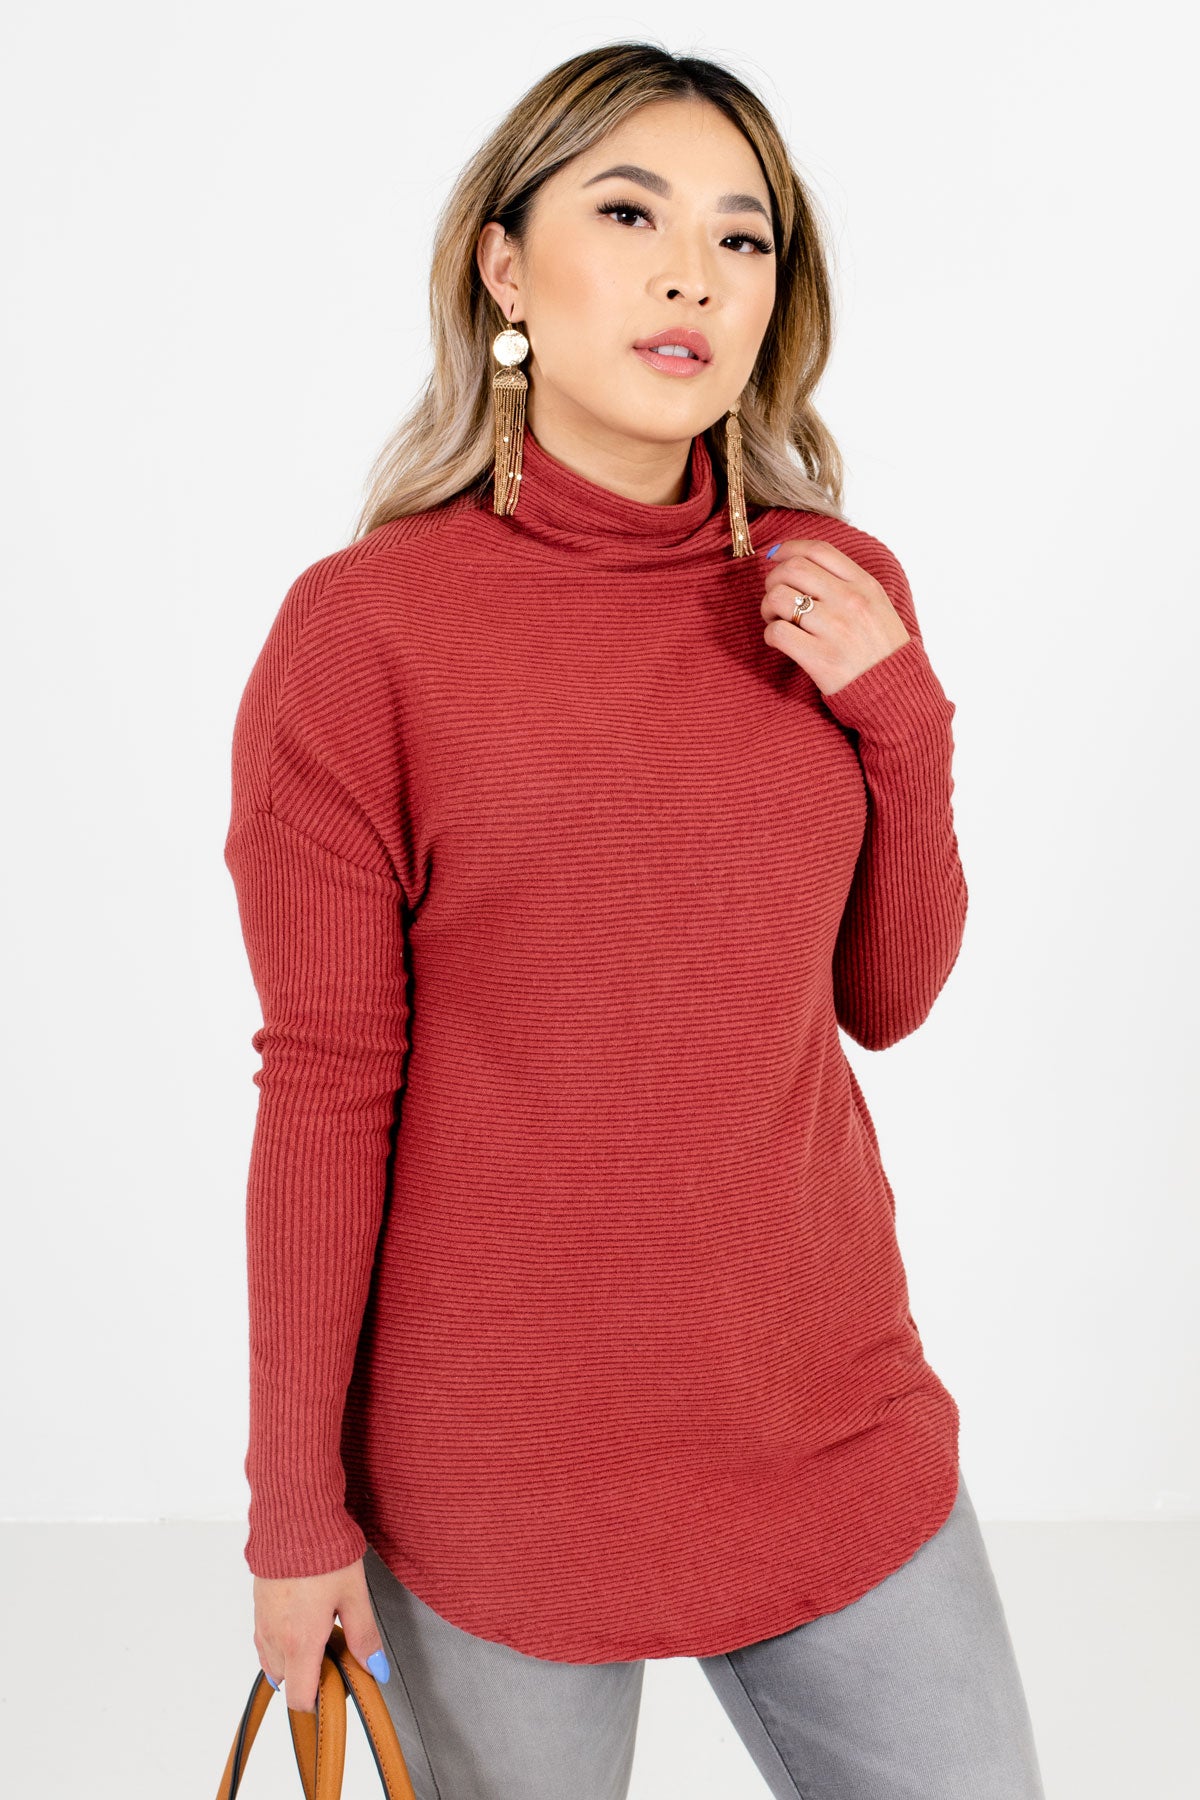 Brick Red Cowl Neck Style Boutique Sweaters for Women